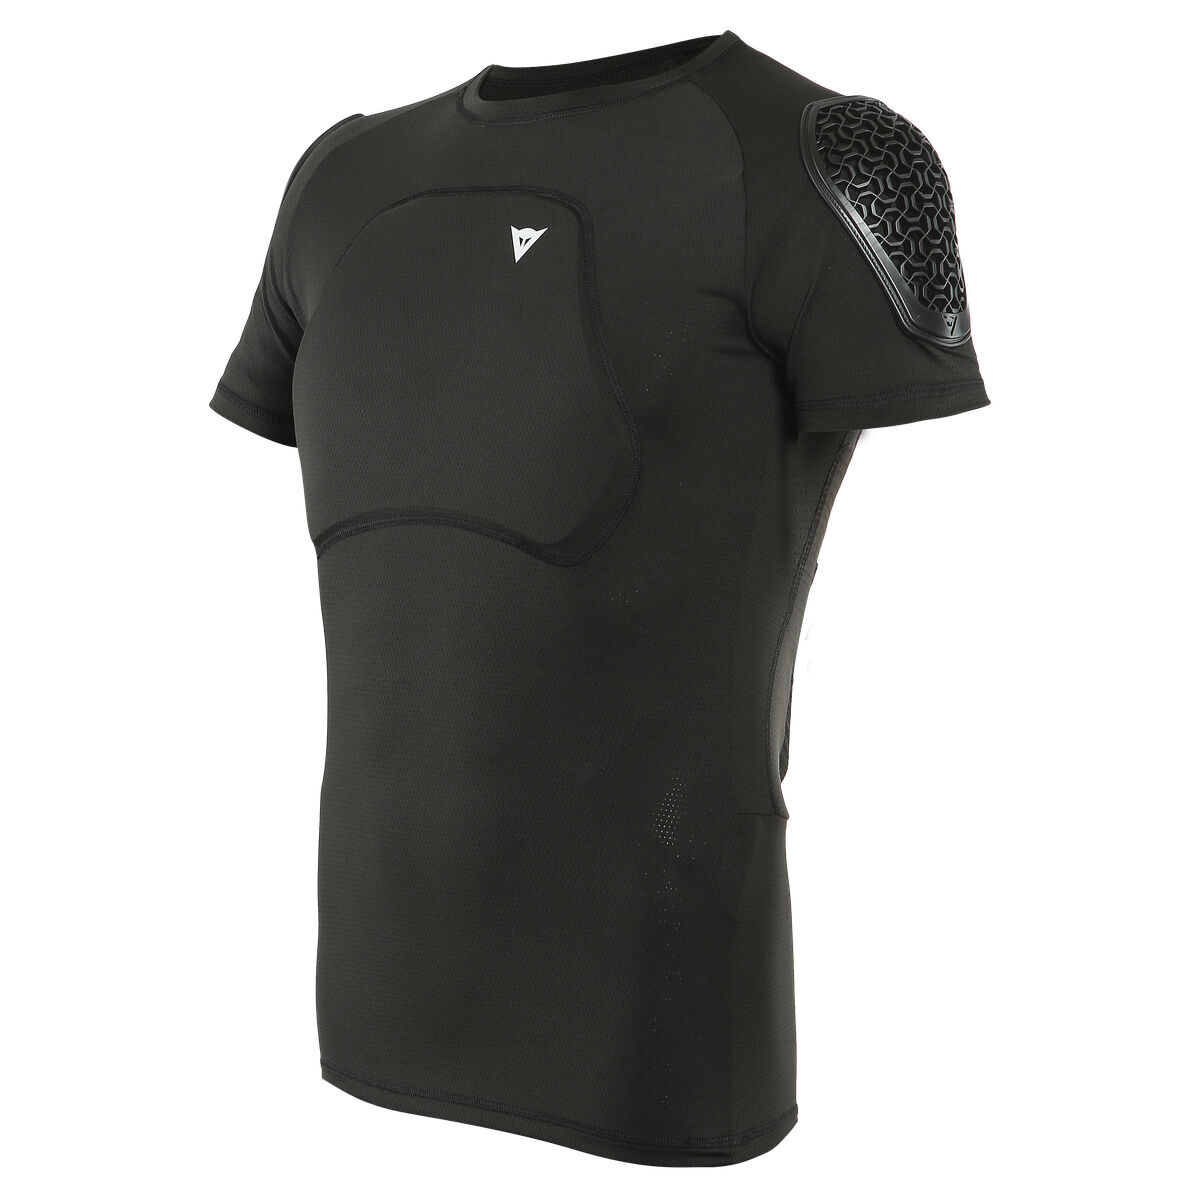 Dainese Trail Skins Pro Tee body protection LordGun online bike store